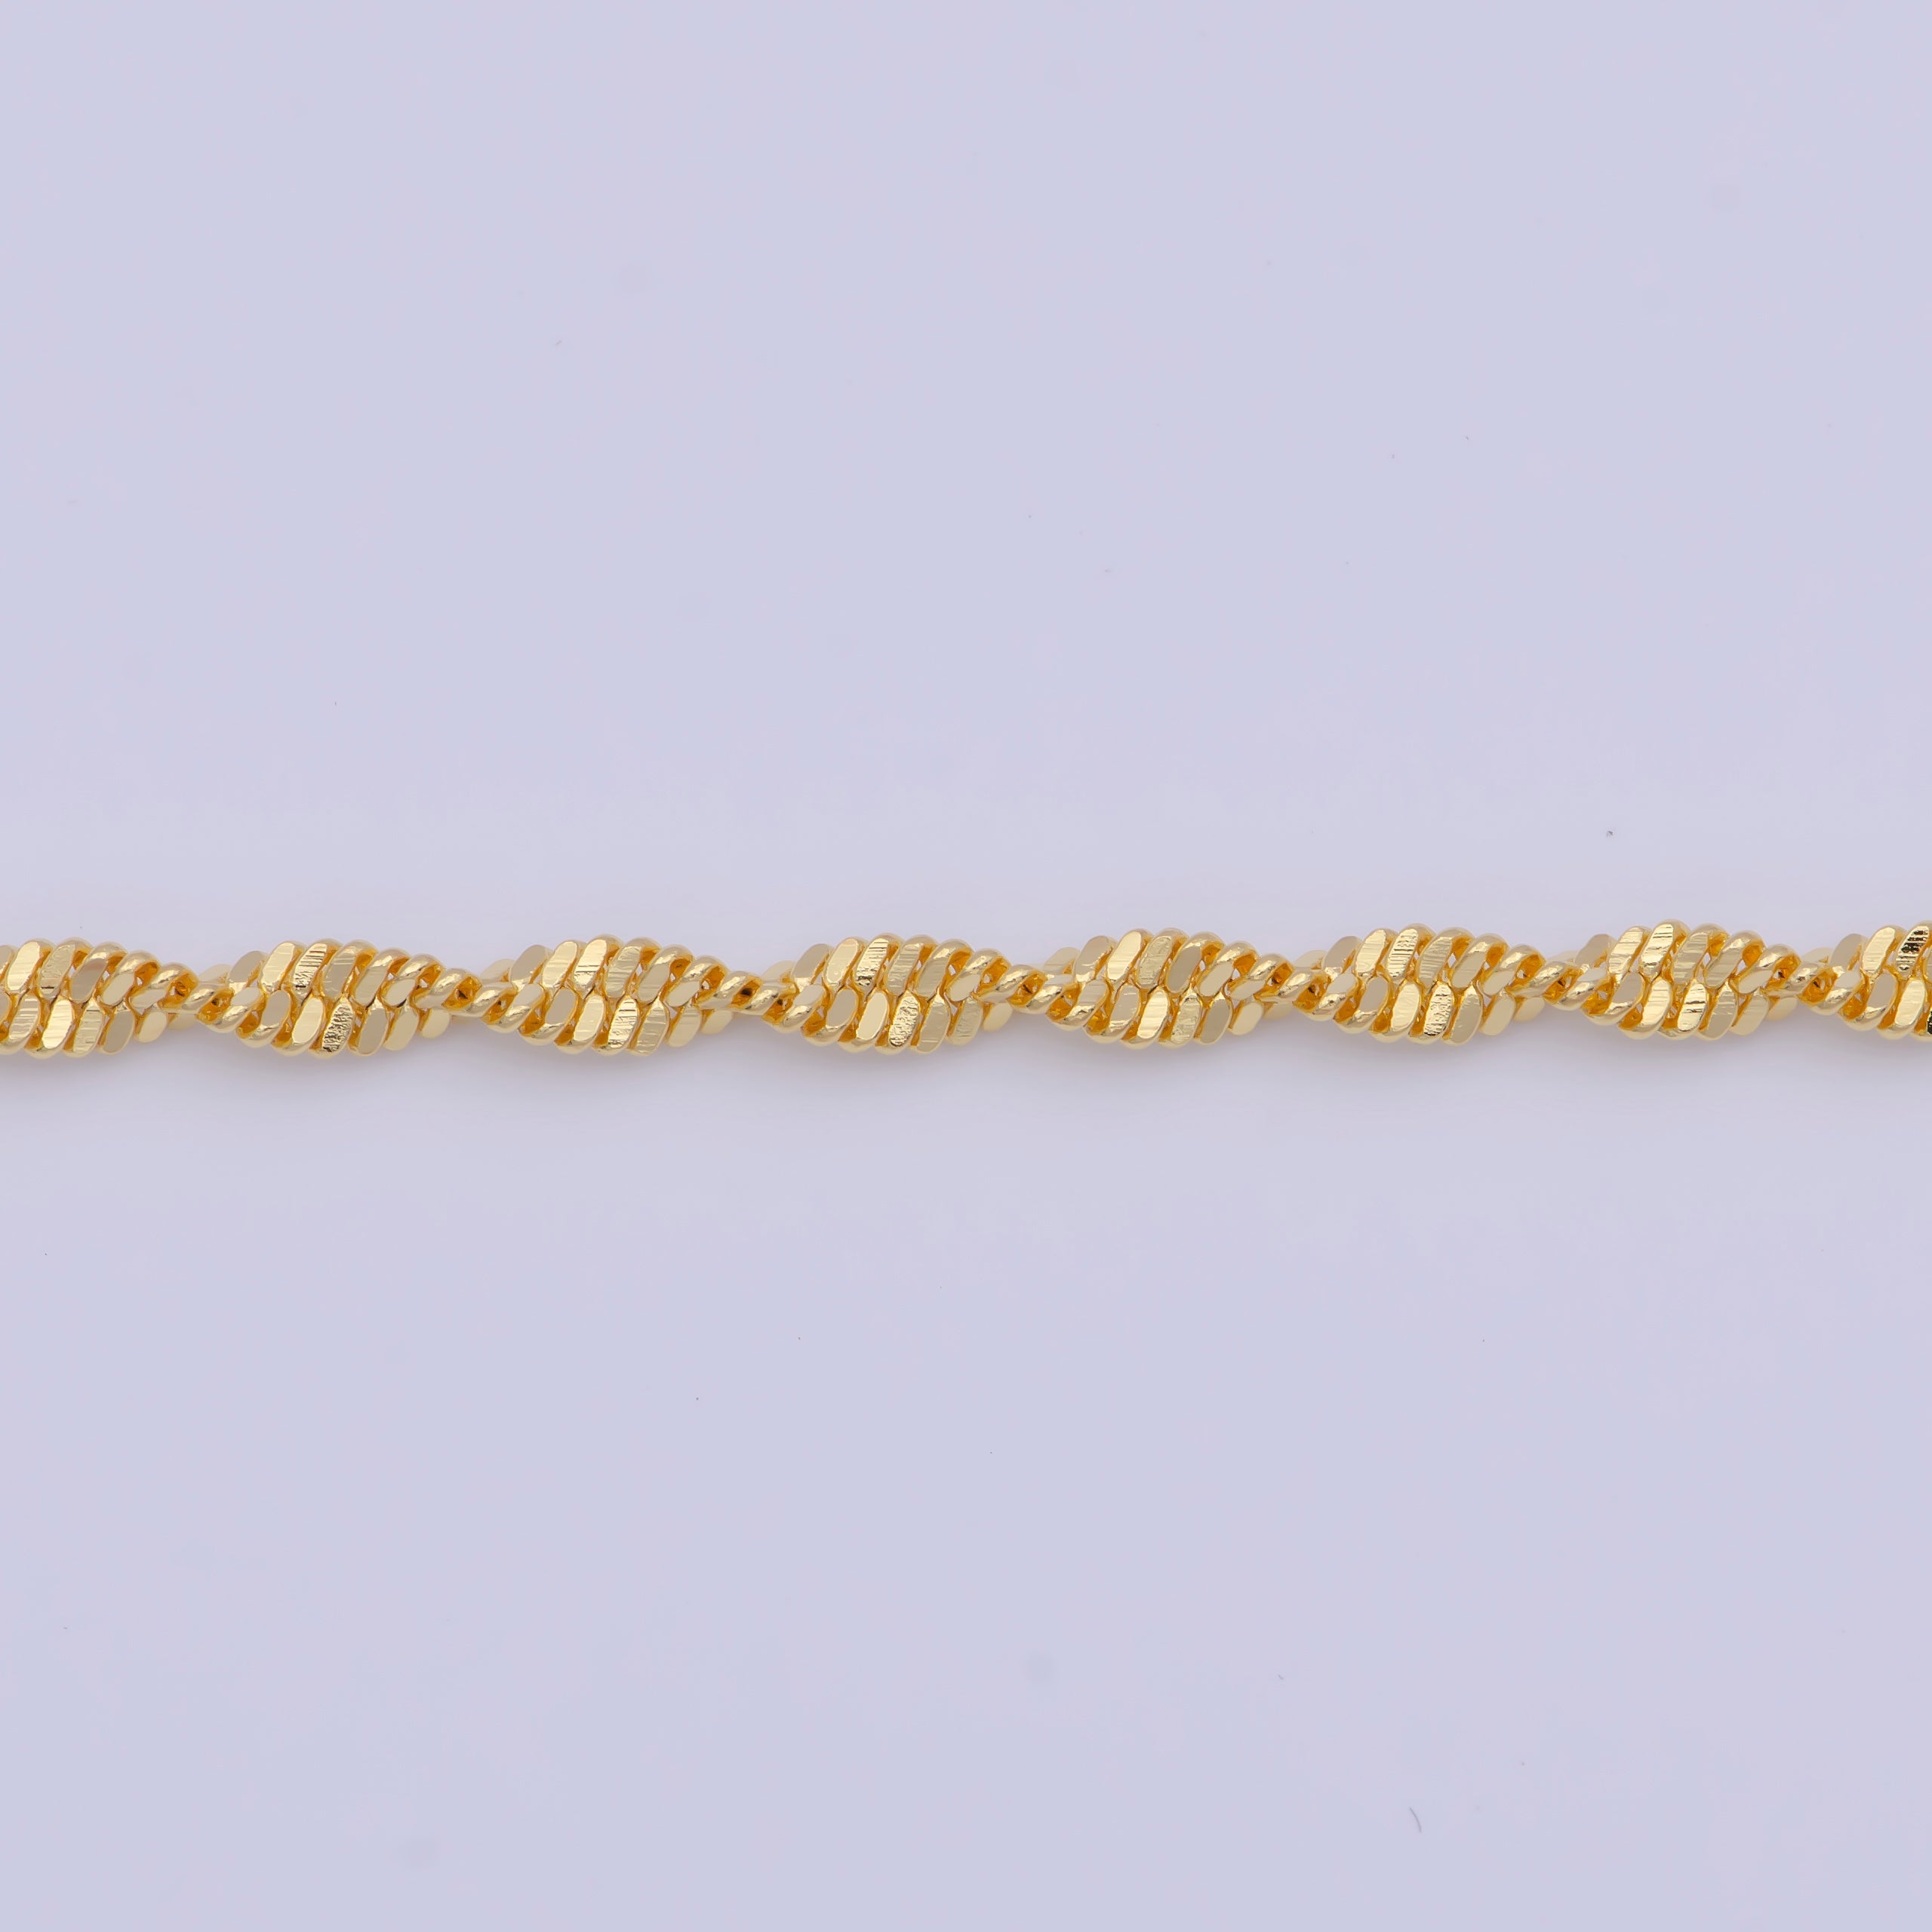 Yellow Gold Chain Necklace, Twist Chain Necklace Ready To Wear for Jewelry Making WA-1129 - DLUXCA